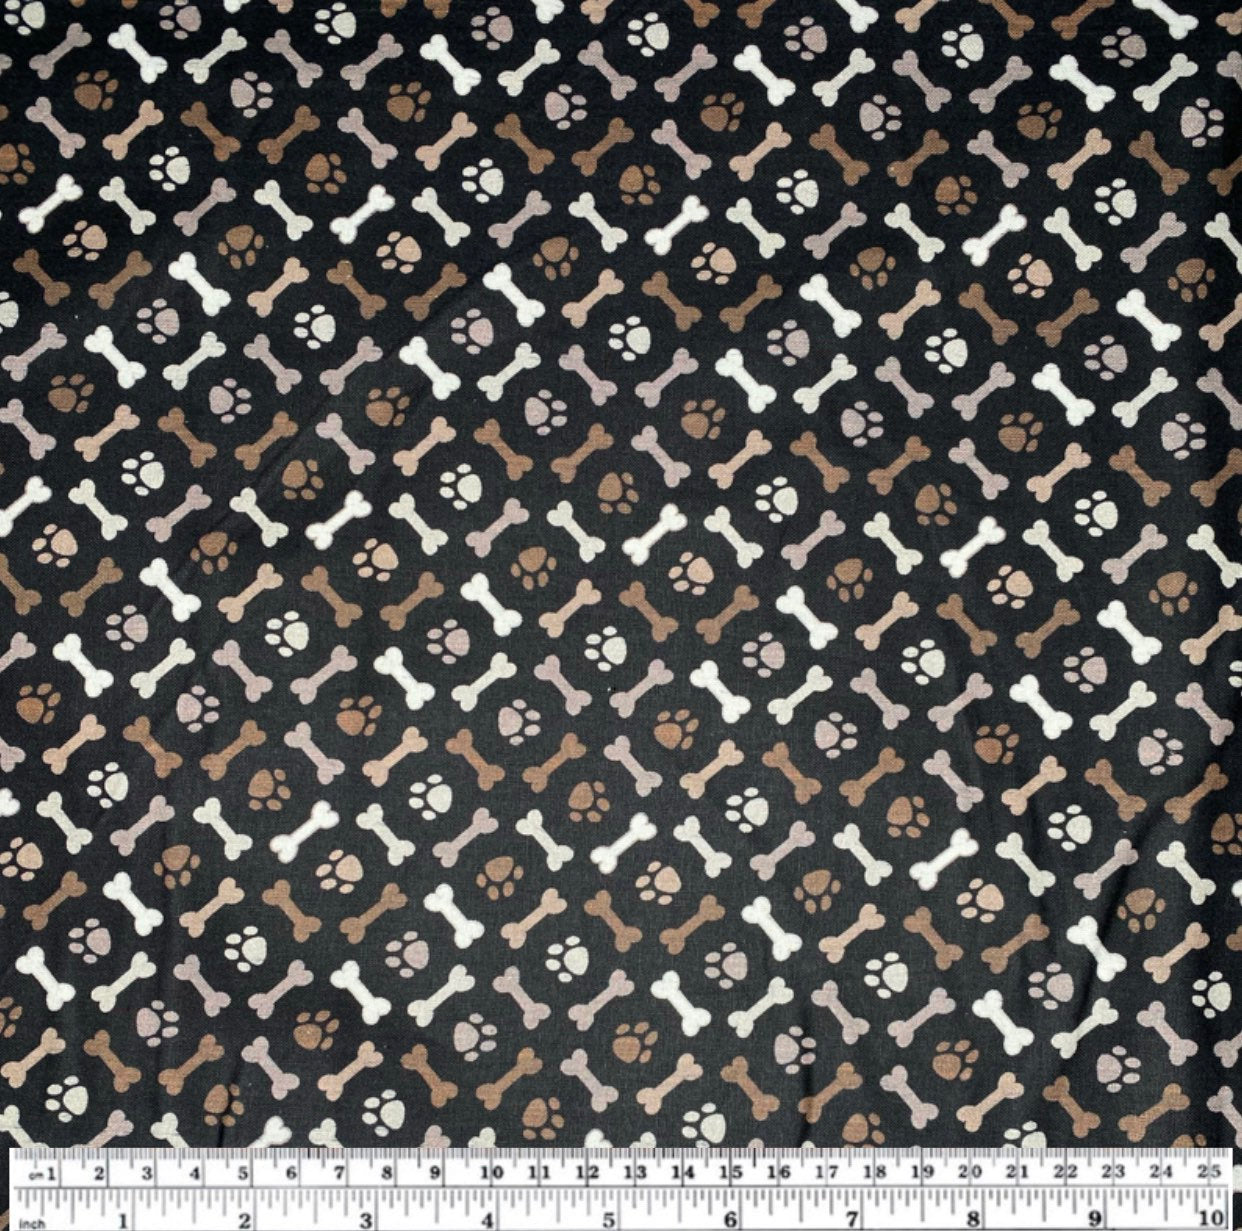 Quilting Cotton - Paw and Bone - Brown/Black